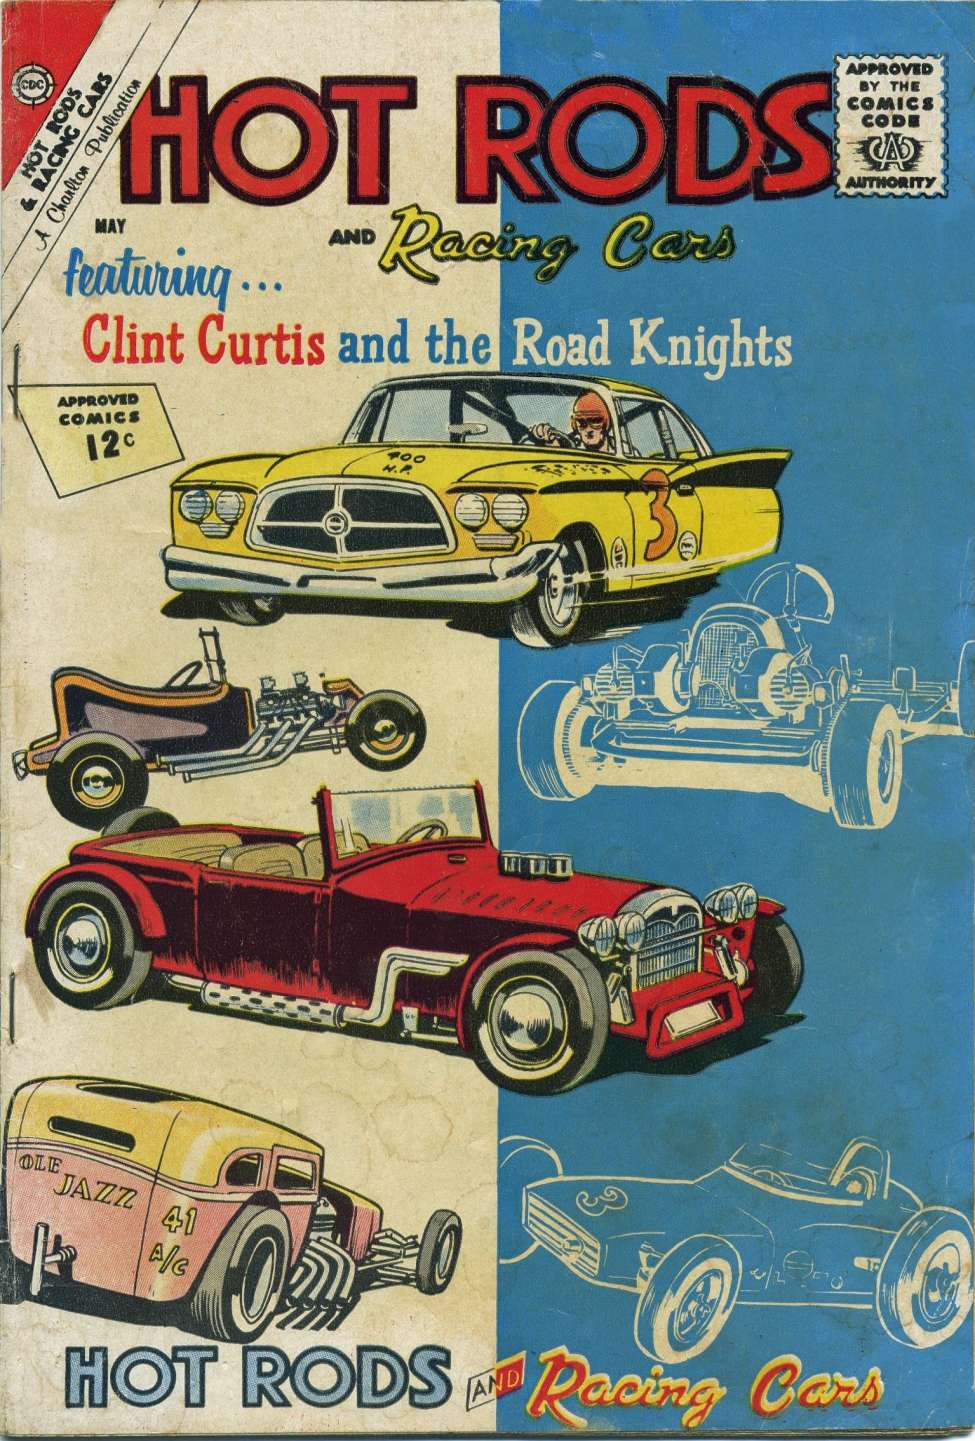 Book Cover For Hot Rods and Racing Cars 57